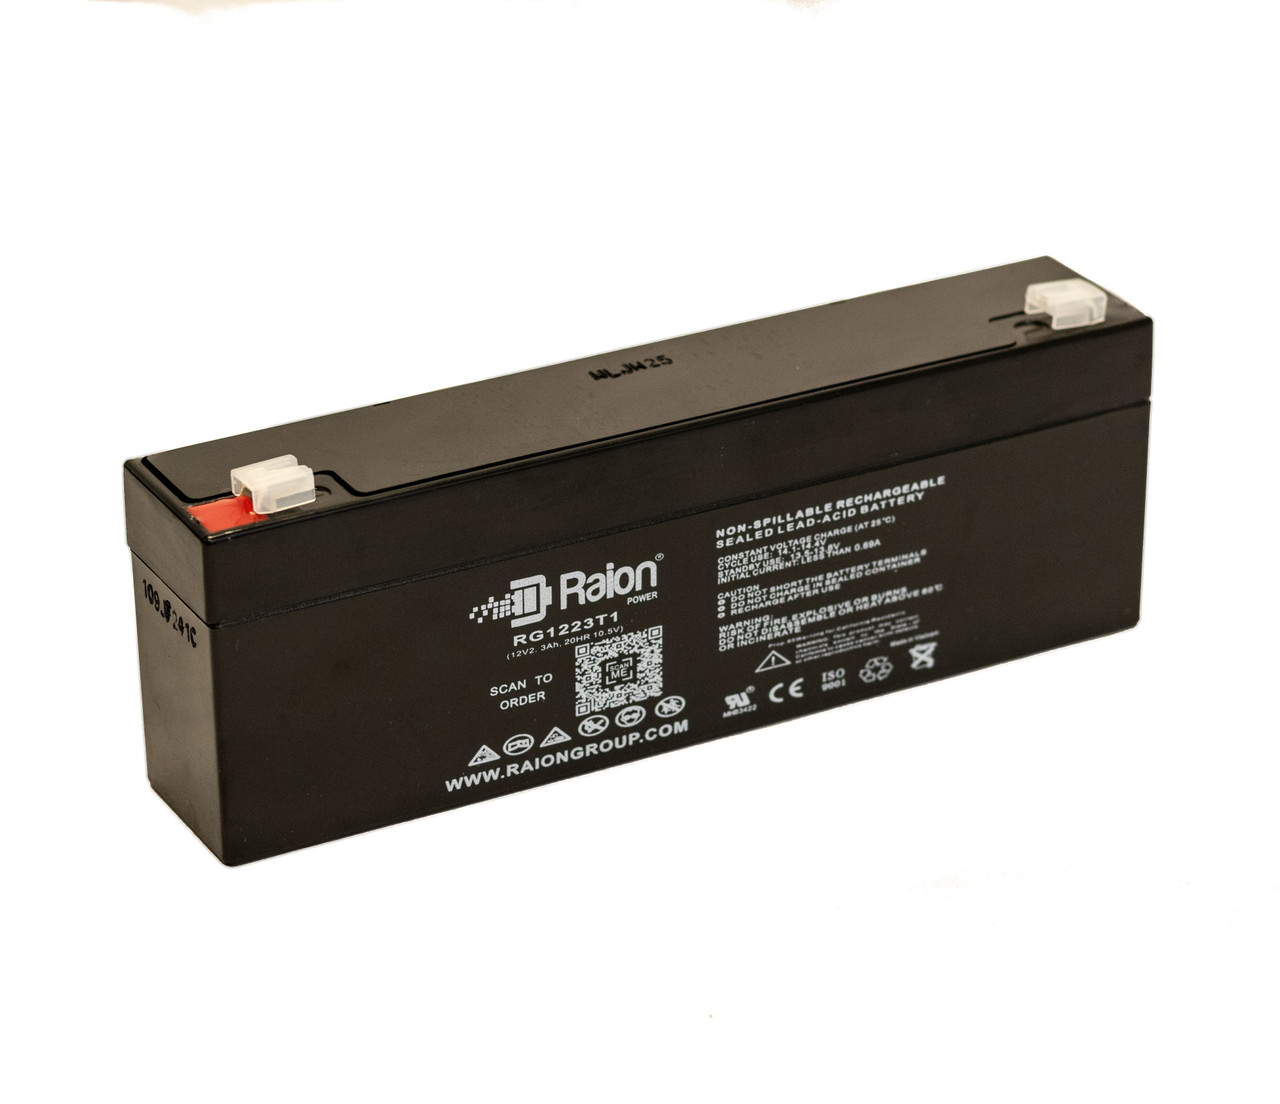 Raion Power RG1223T1 Replacement Battery for Empire Scientific SLA 2.2-12